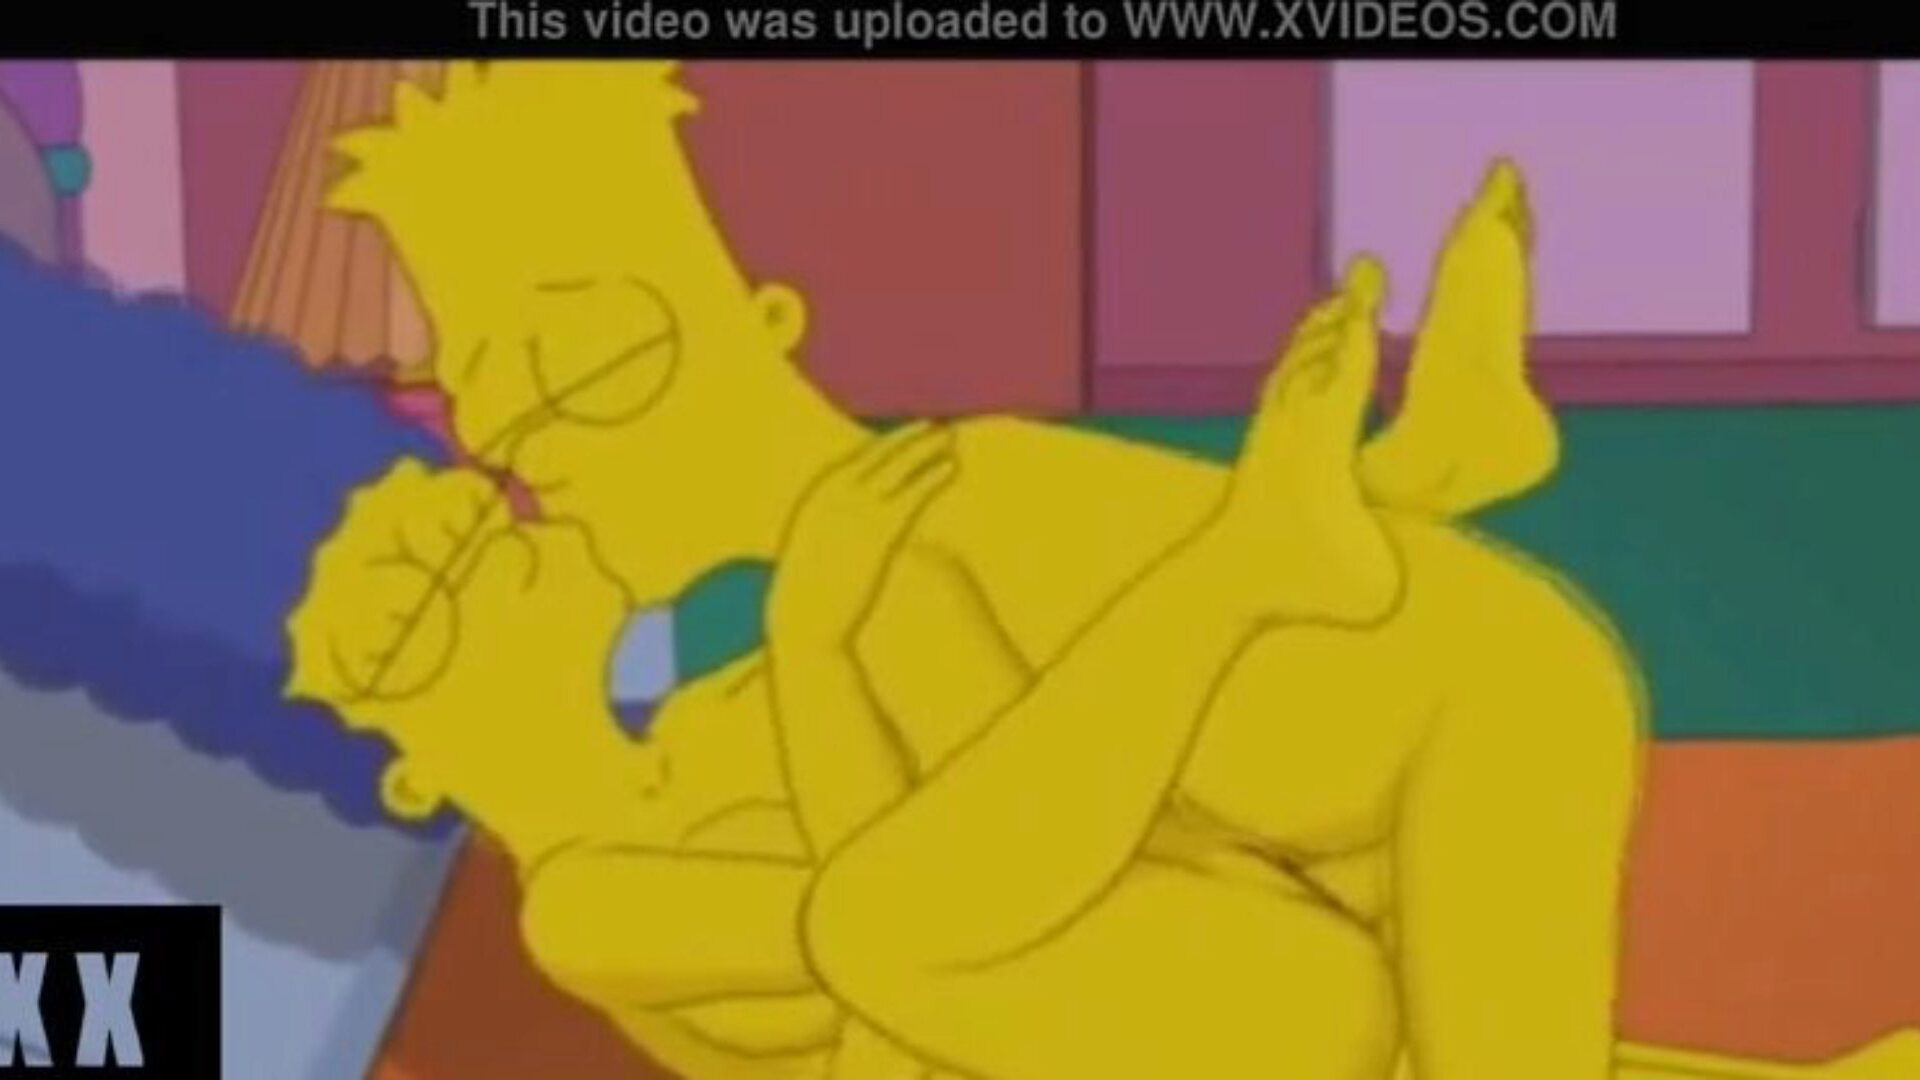 Los Simpsons Bart cogiendo a Marge